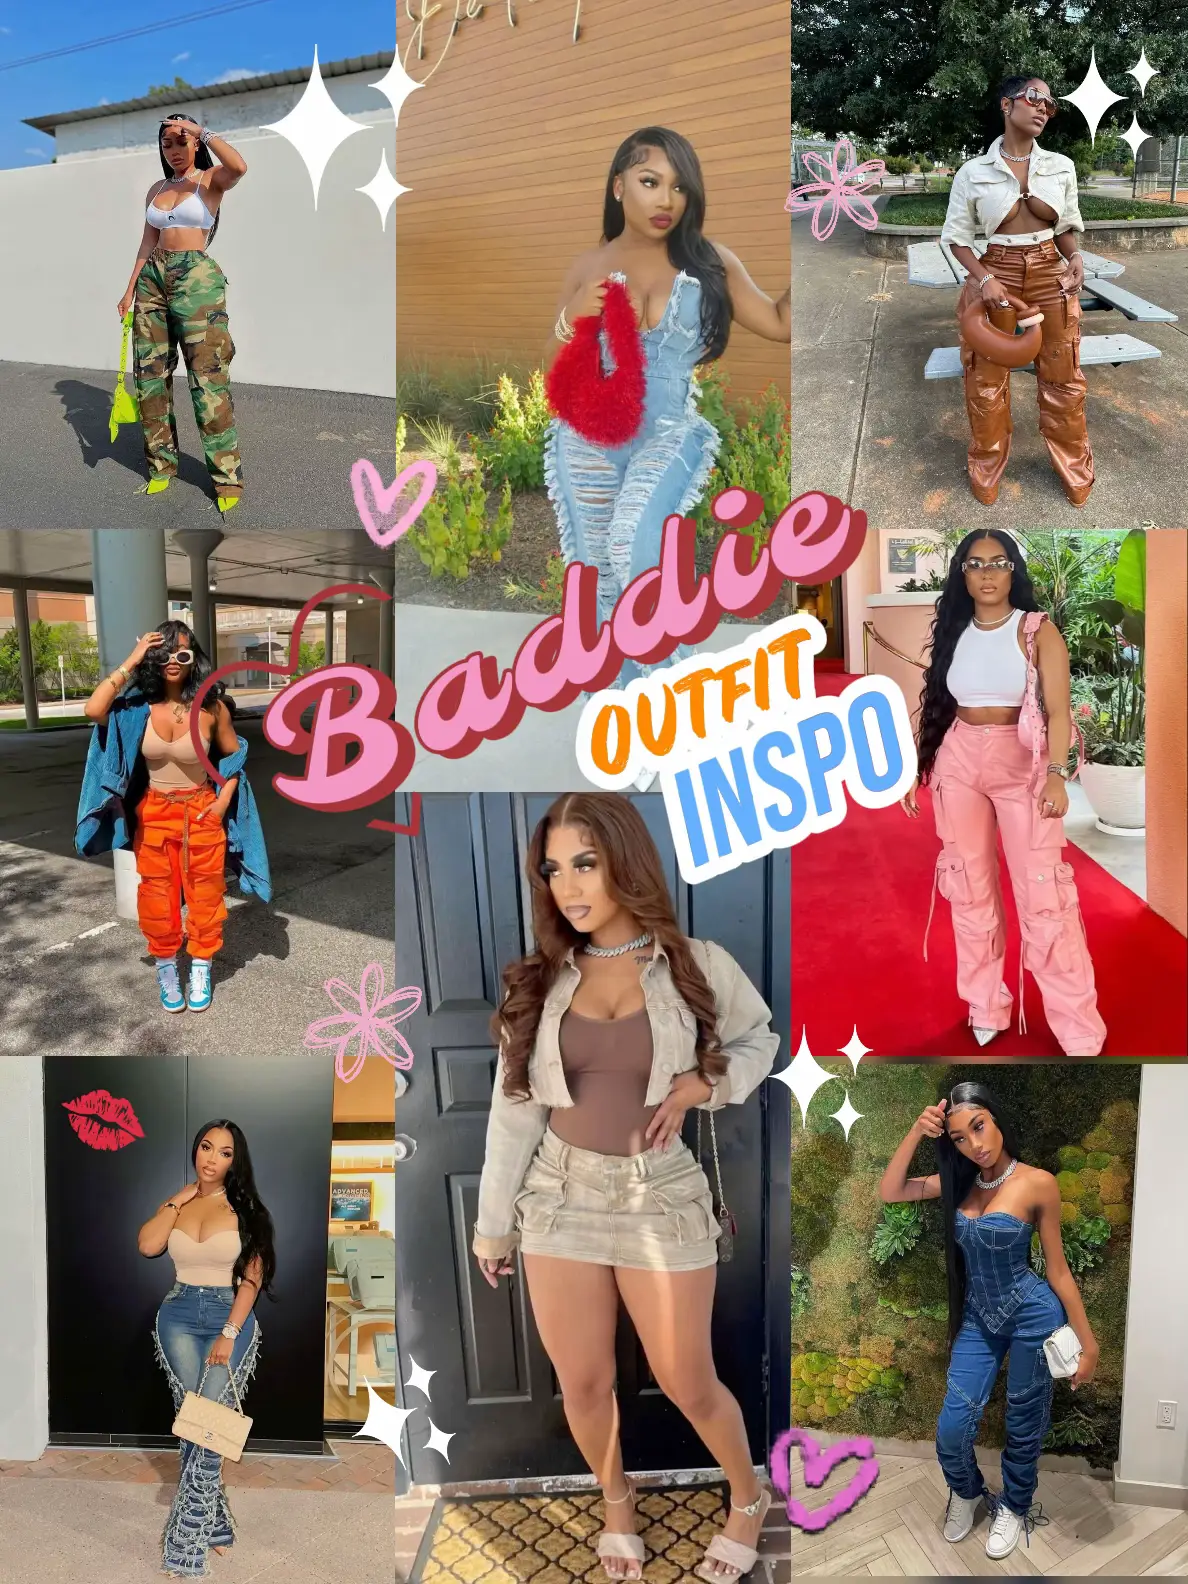 100+ EVERYDAY BADDIE OUTFIT IDEAS😍